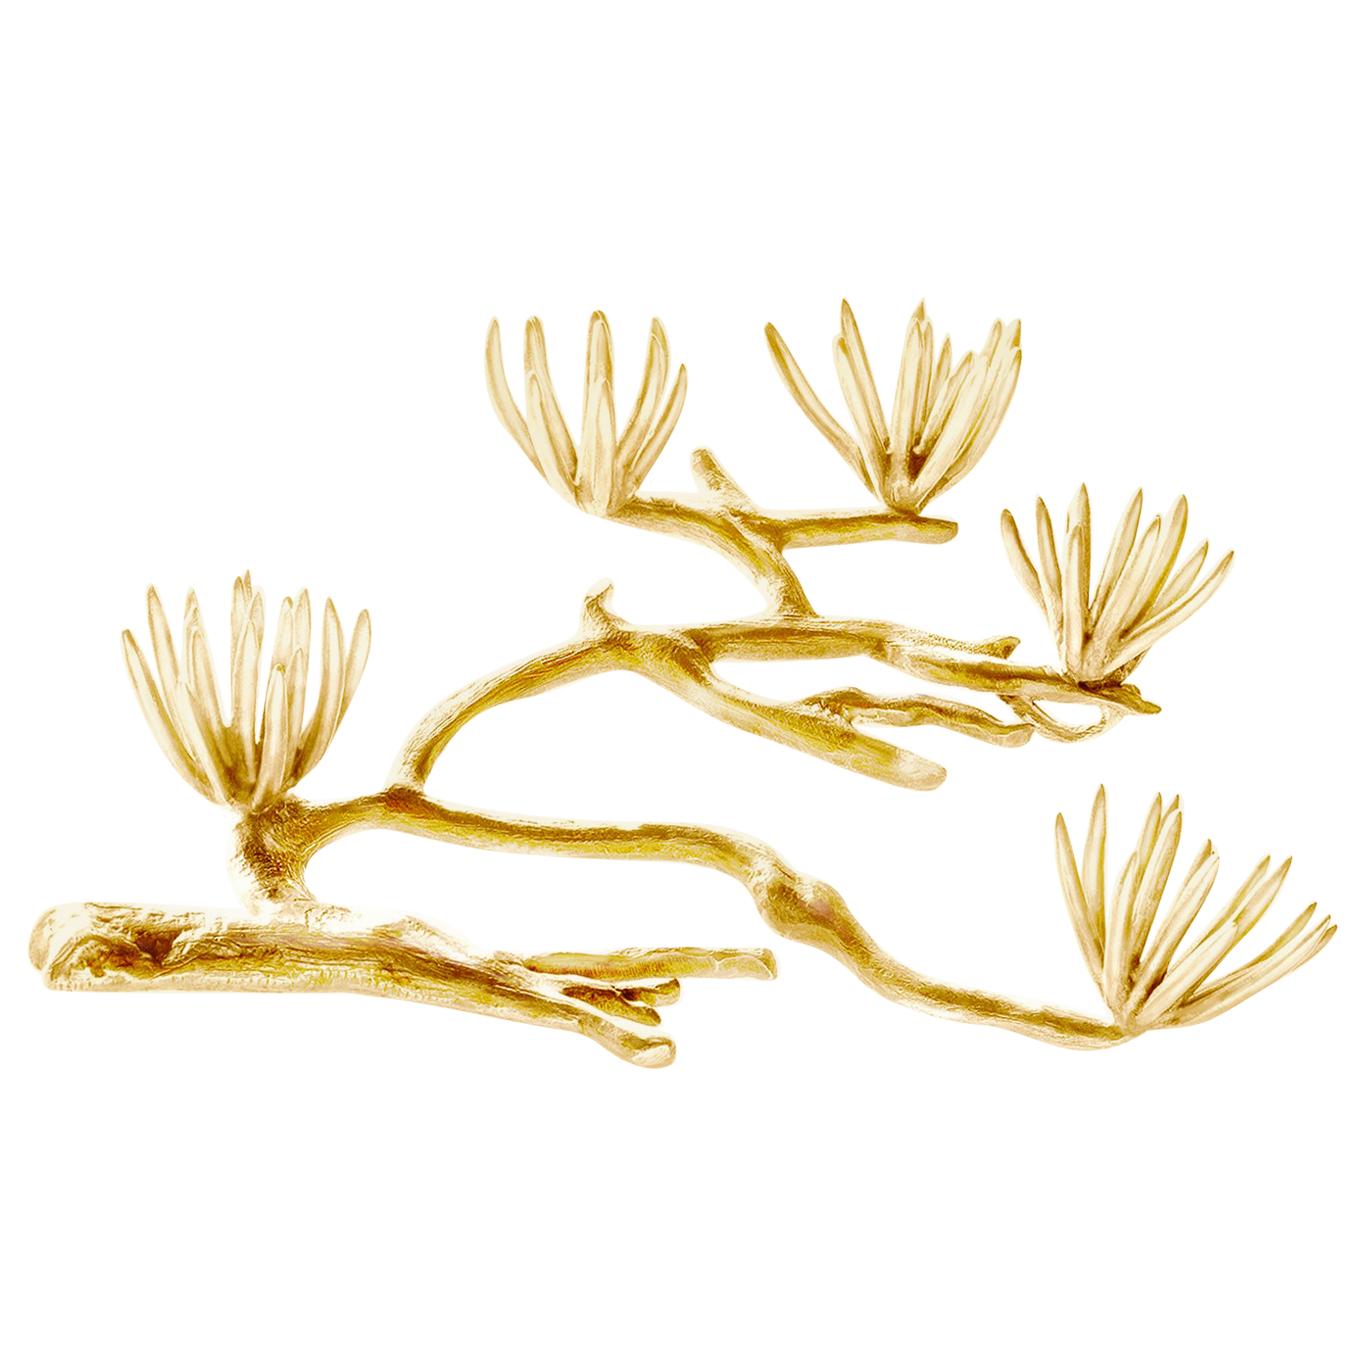 Featured in Vogue Yellow Gold Pine Sculptural Brooch by the Artist